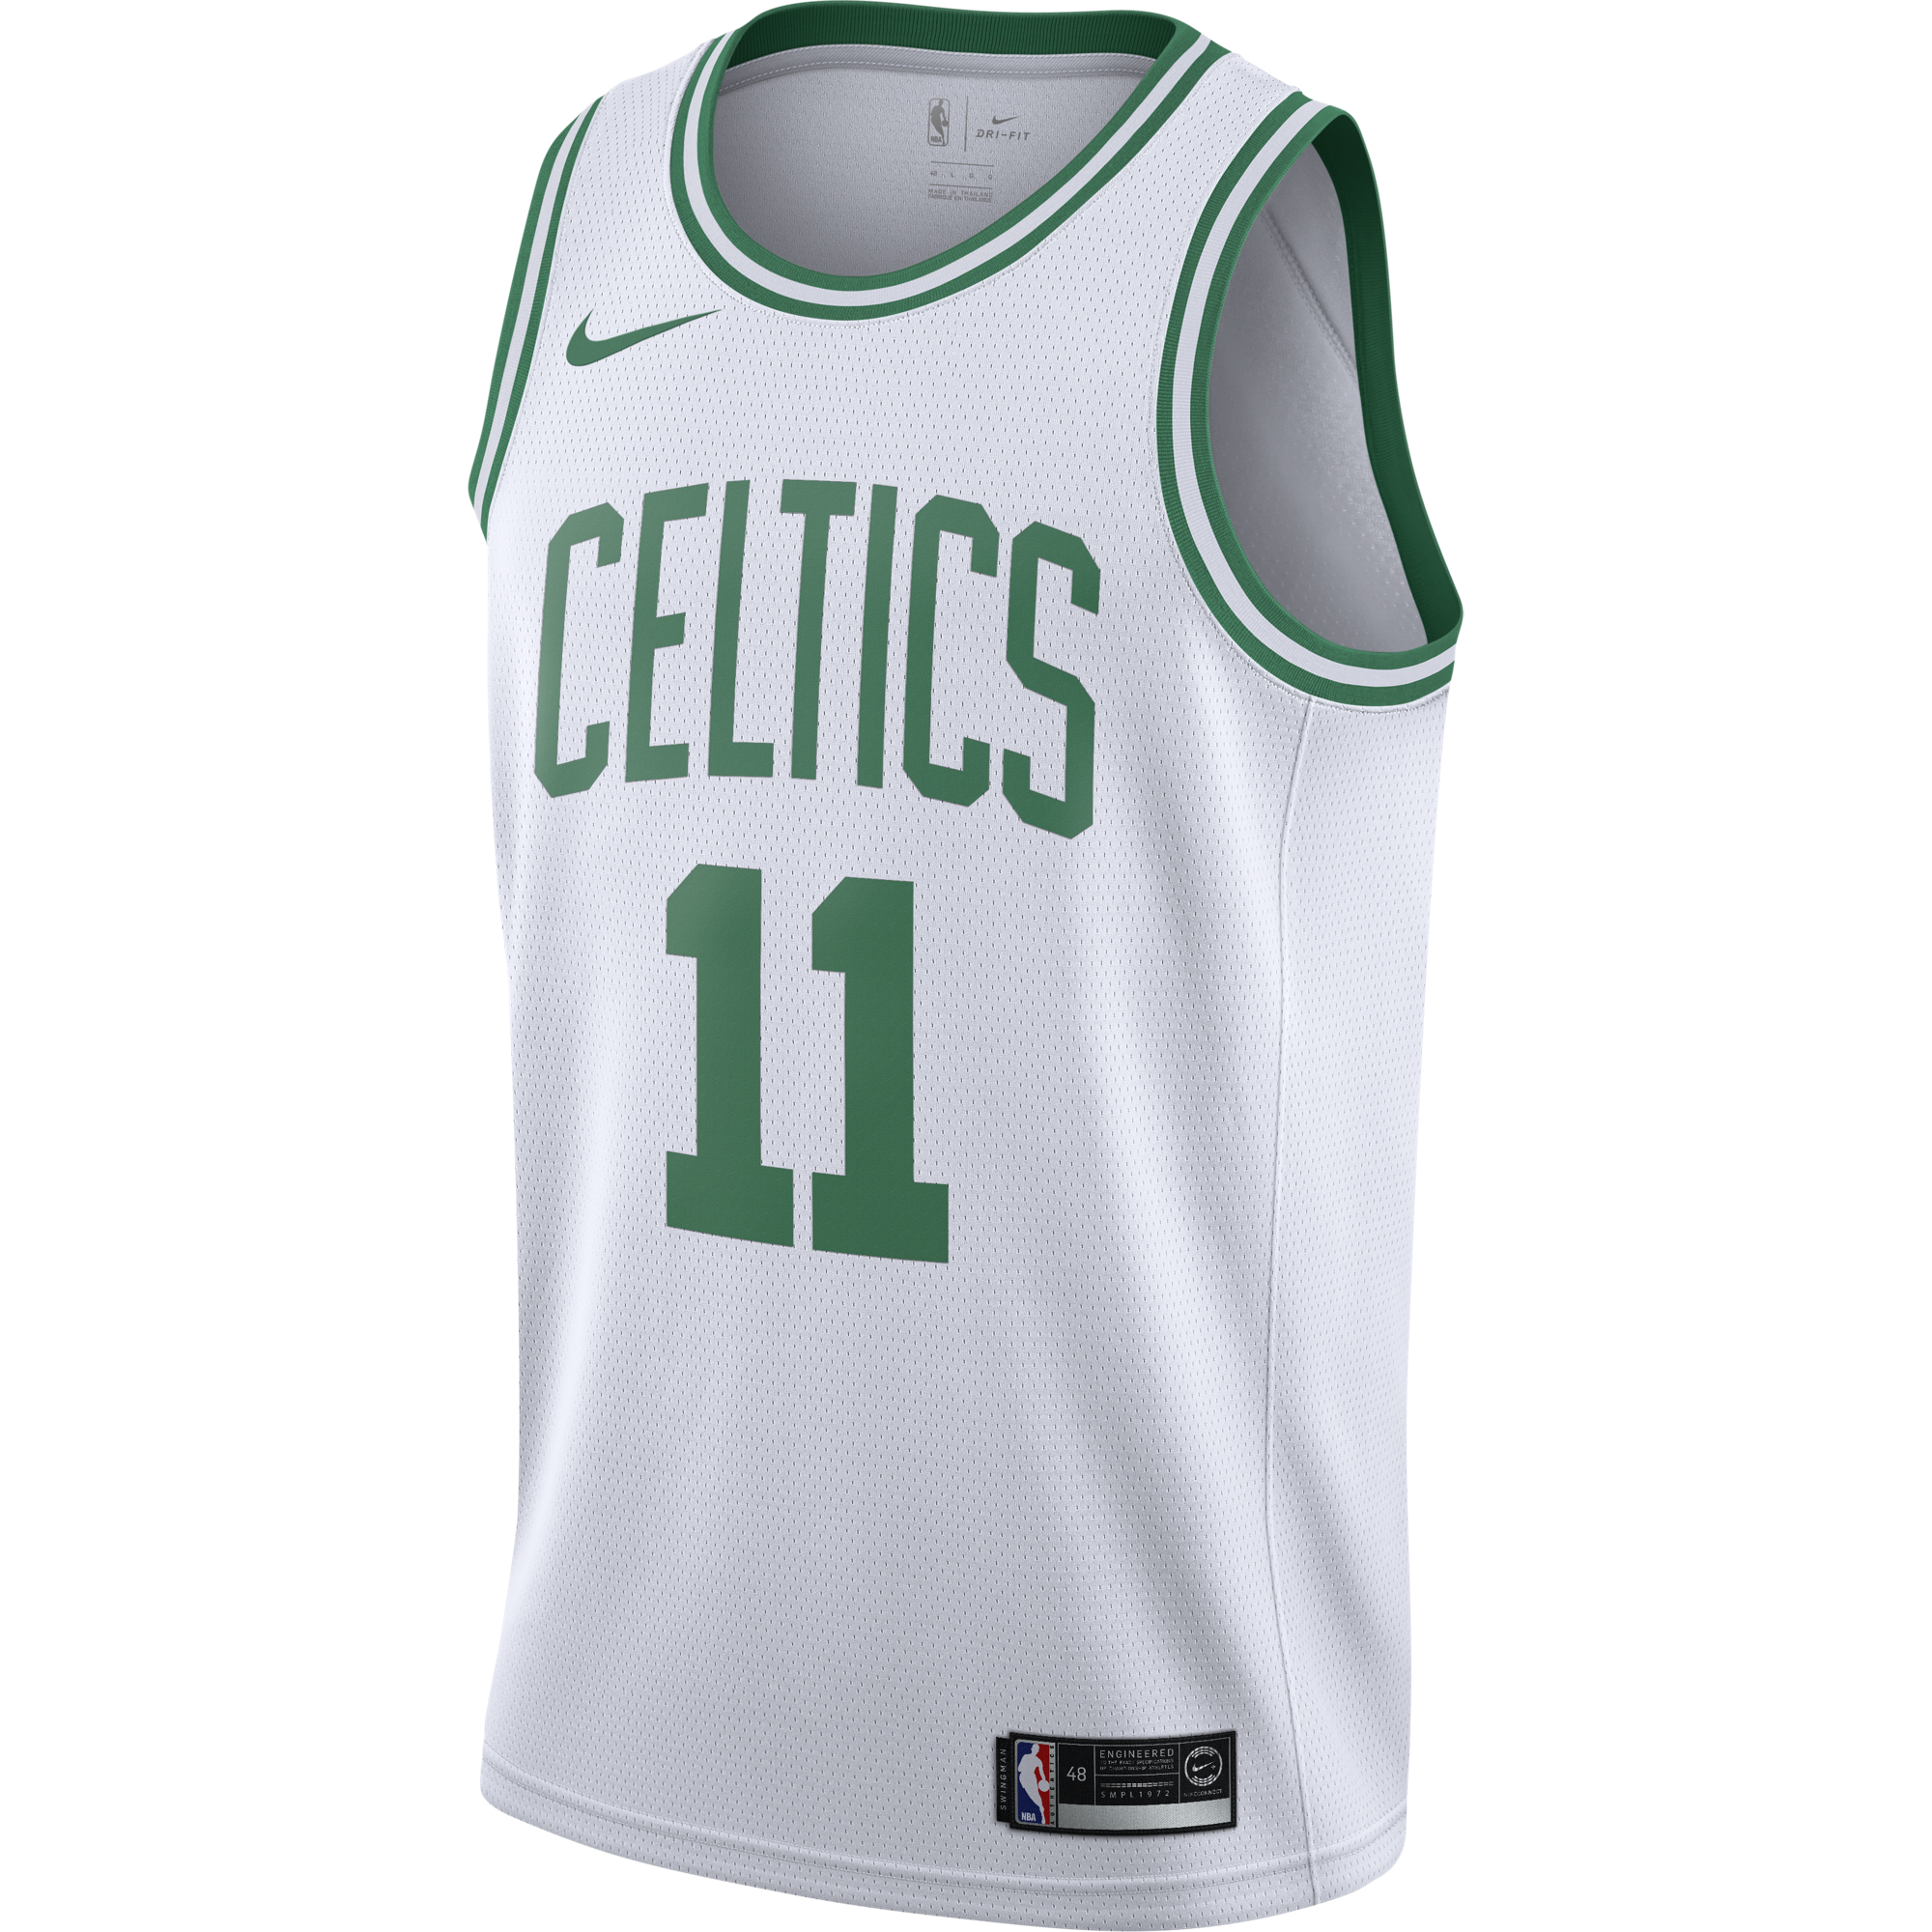 kyrie irving home jersey